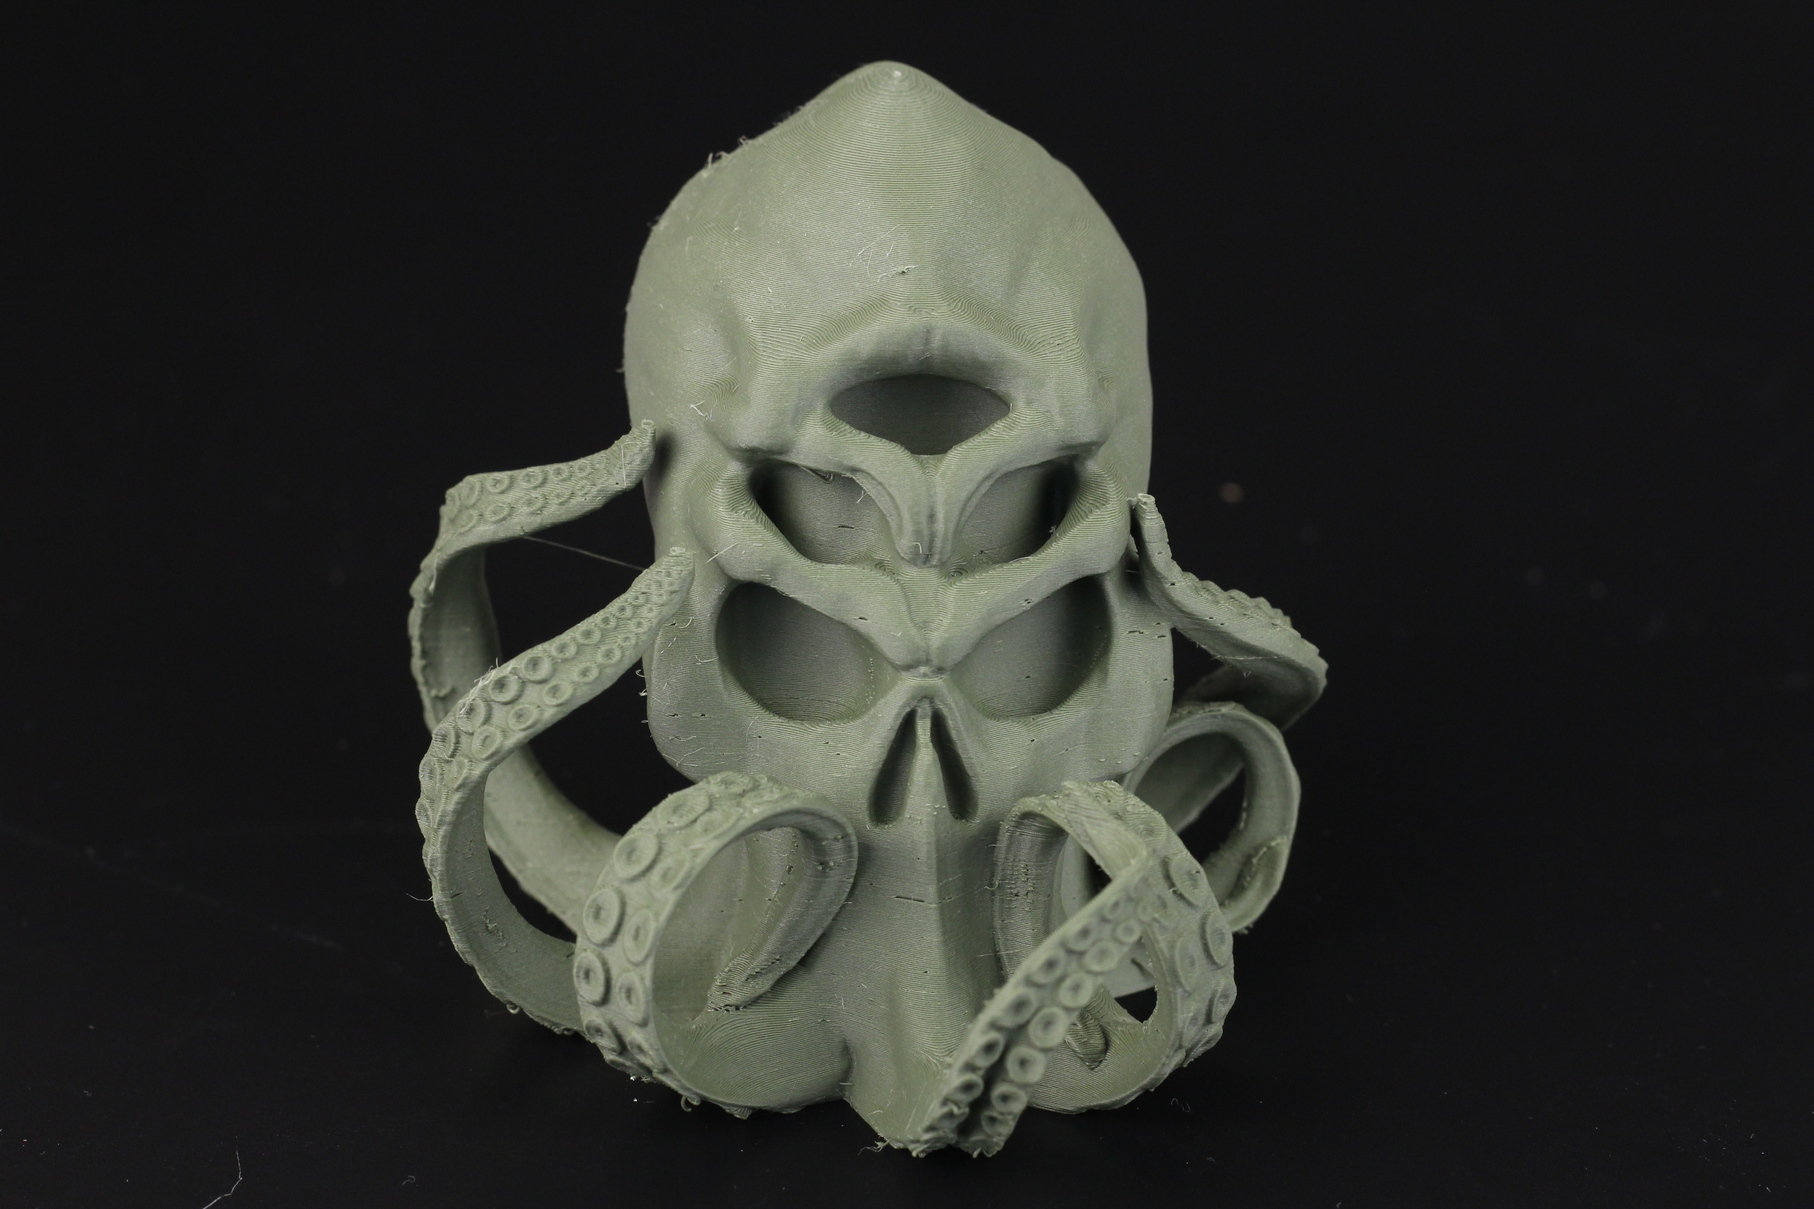 Cthulu printed on BIQU B1 SE PLUS 1 | BIQU B1 SE PLUS Review: SKR 2 and ABL from Factory